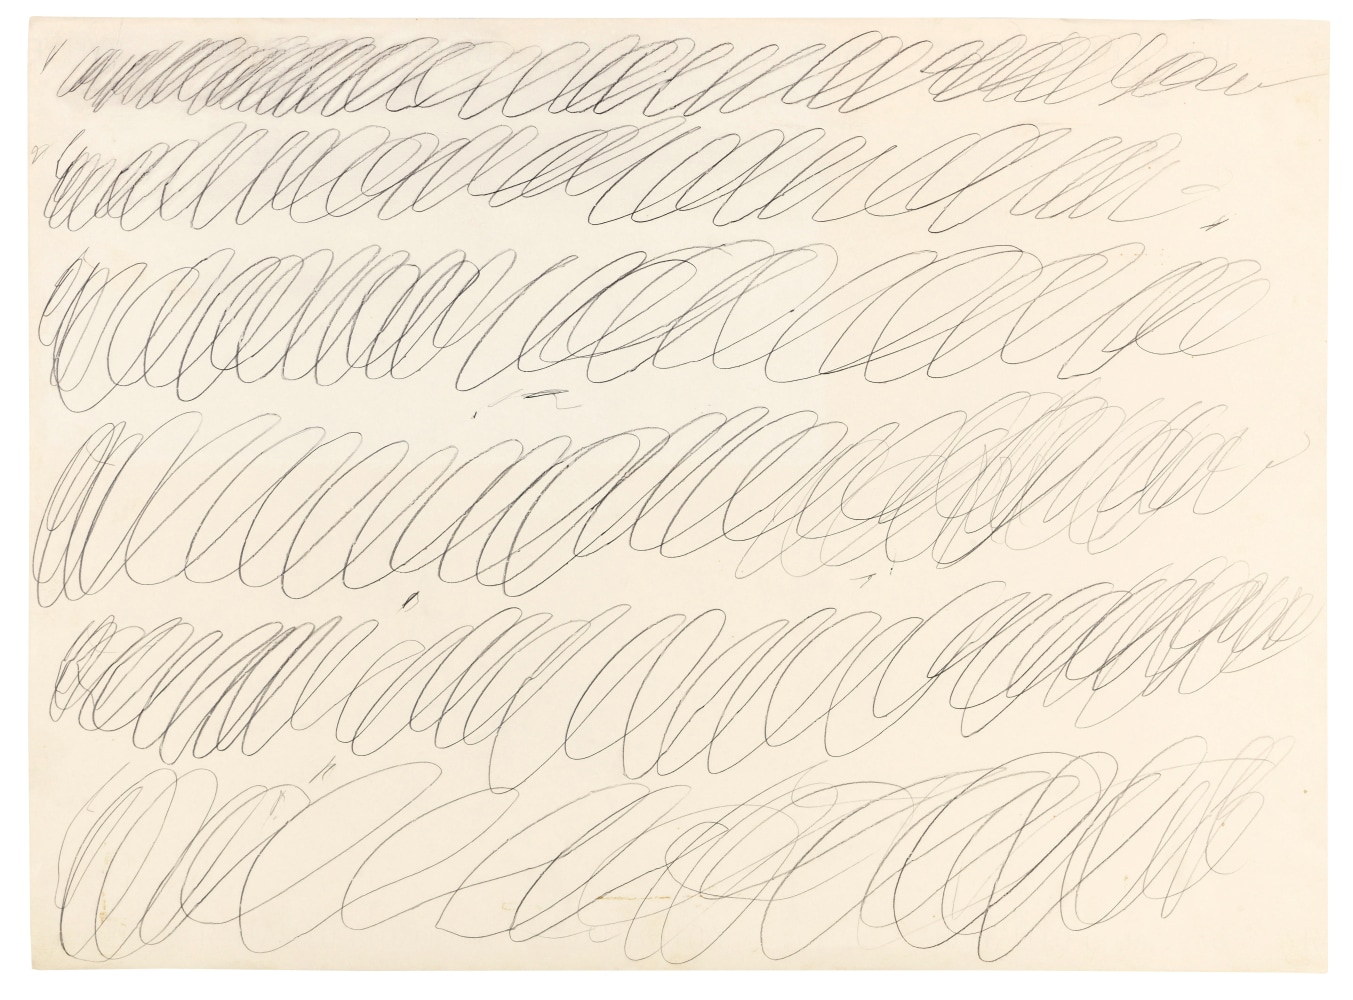 Cy Twombly

Untitled (Drawing for the Manifesto of Plinio)

1967&amp;nbsp;

graphite on paper&amp;nbsp;

19 x 26 inches (48.3 x 66 cm)